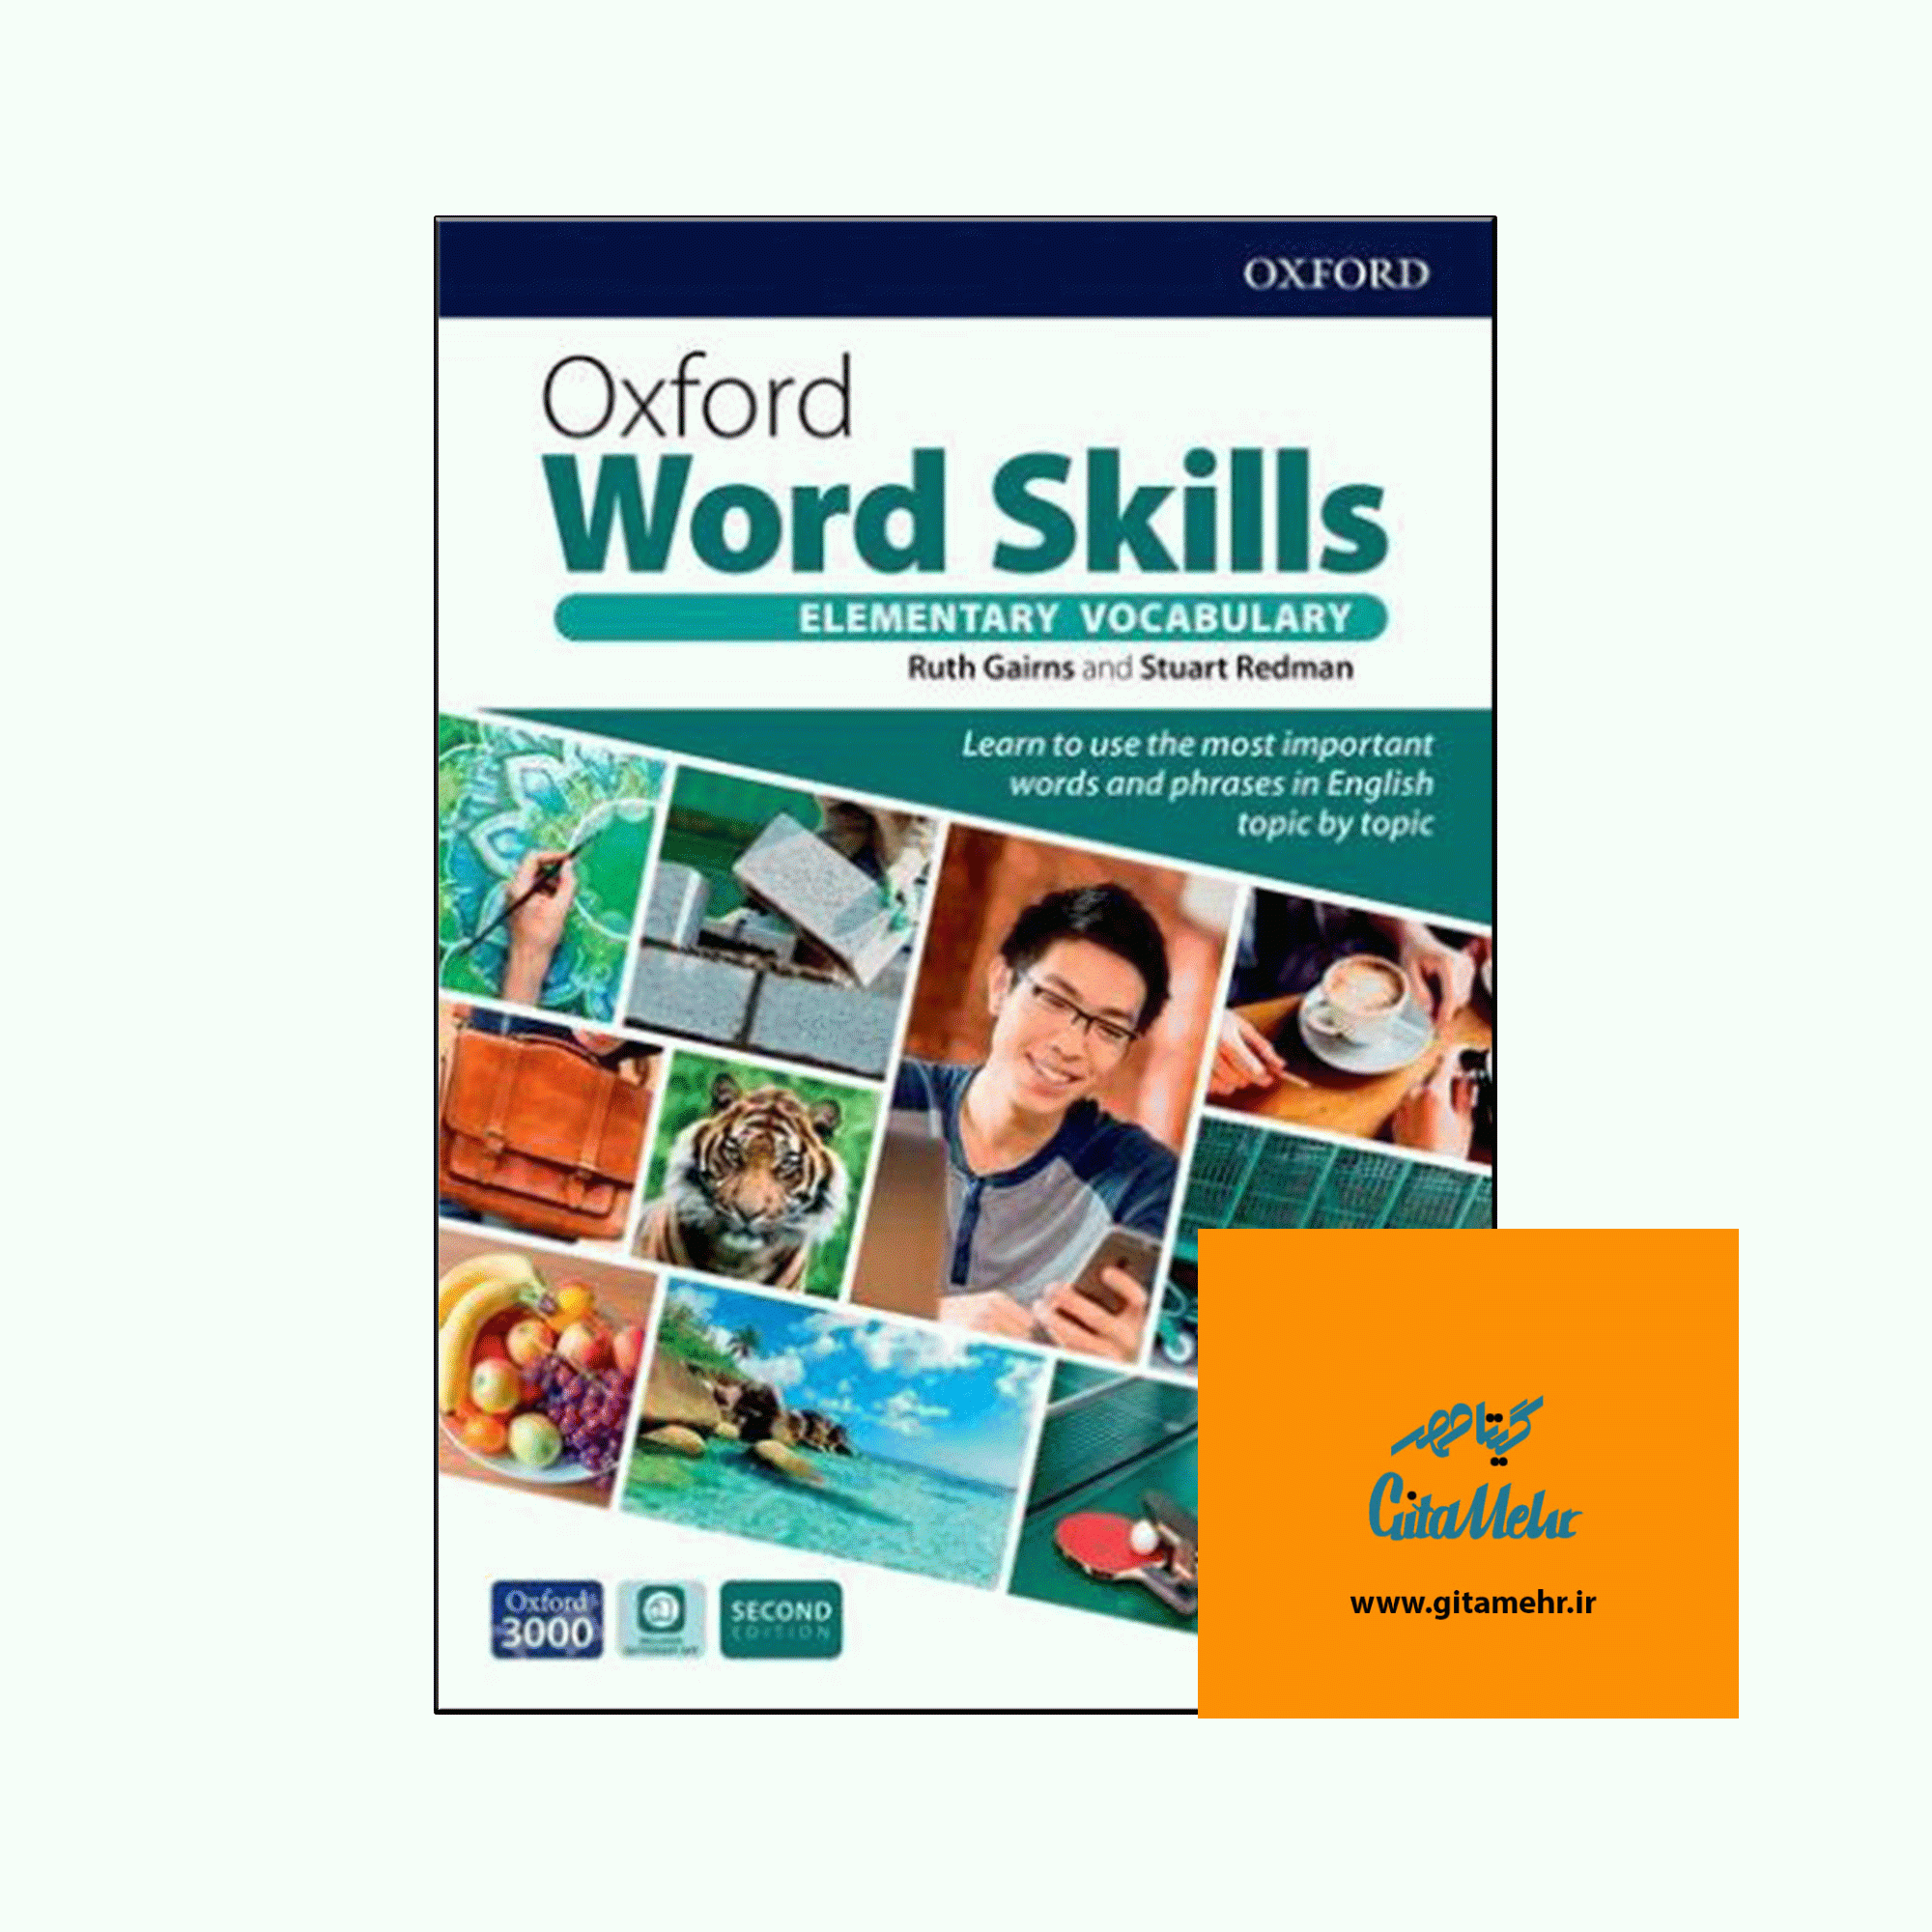 oxford word skills 2nd elementary d8a7d986d8afd8a7d8b2d987 d988d8b2db8cd8b1db8c 65ef48e5c8d73